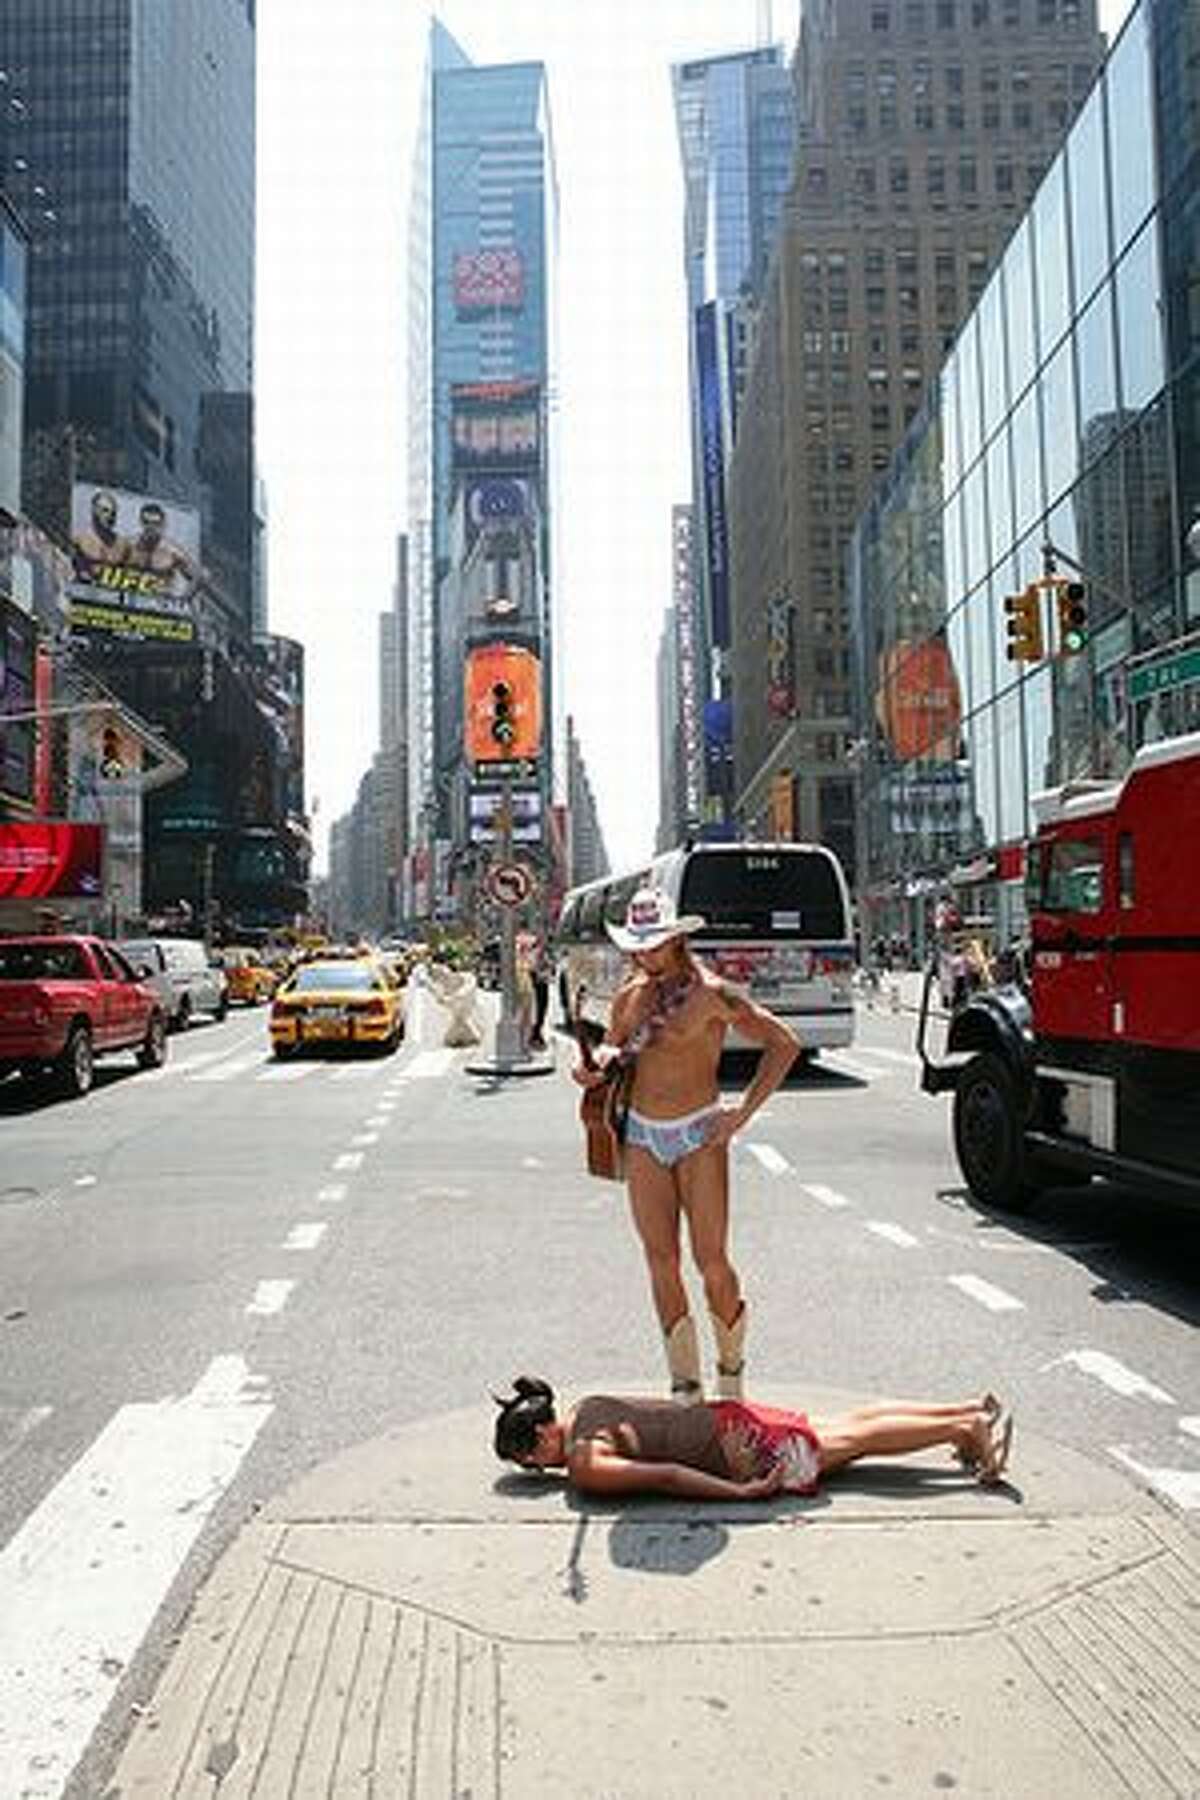 The Naked Cowboy checks out Amy Mihyang in Times Square, New York City. (Russ Heller/Facedowns) See more photos here. Our story on Facedowns, the photo blog.